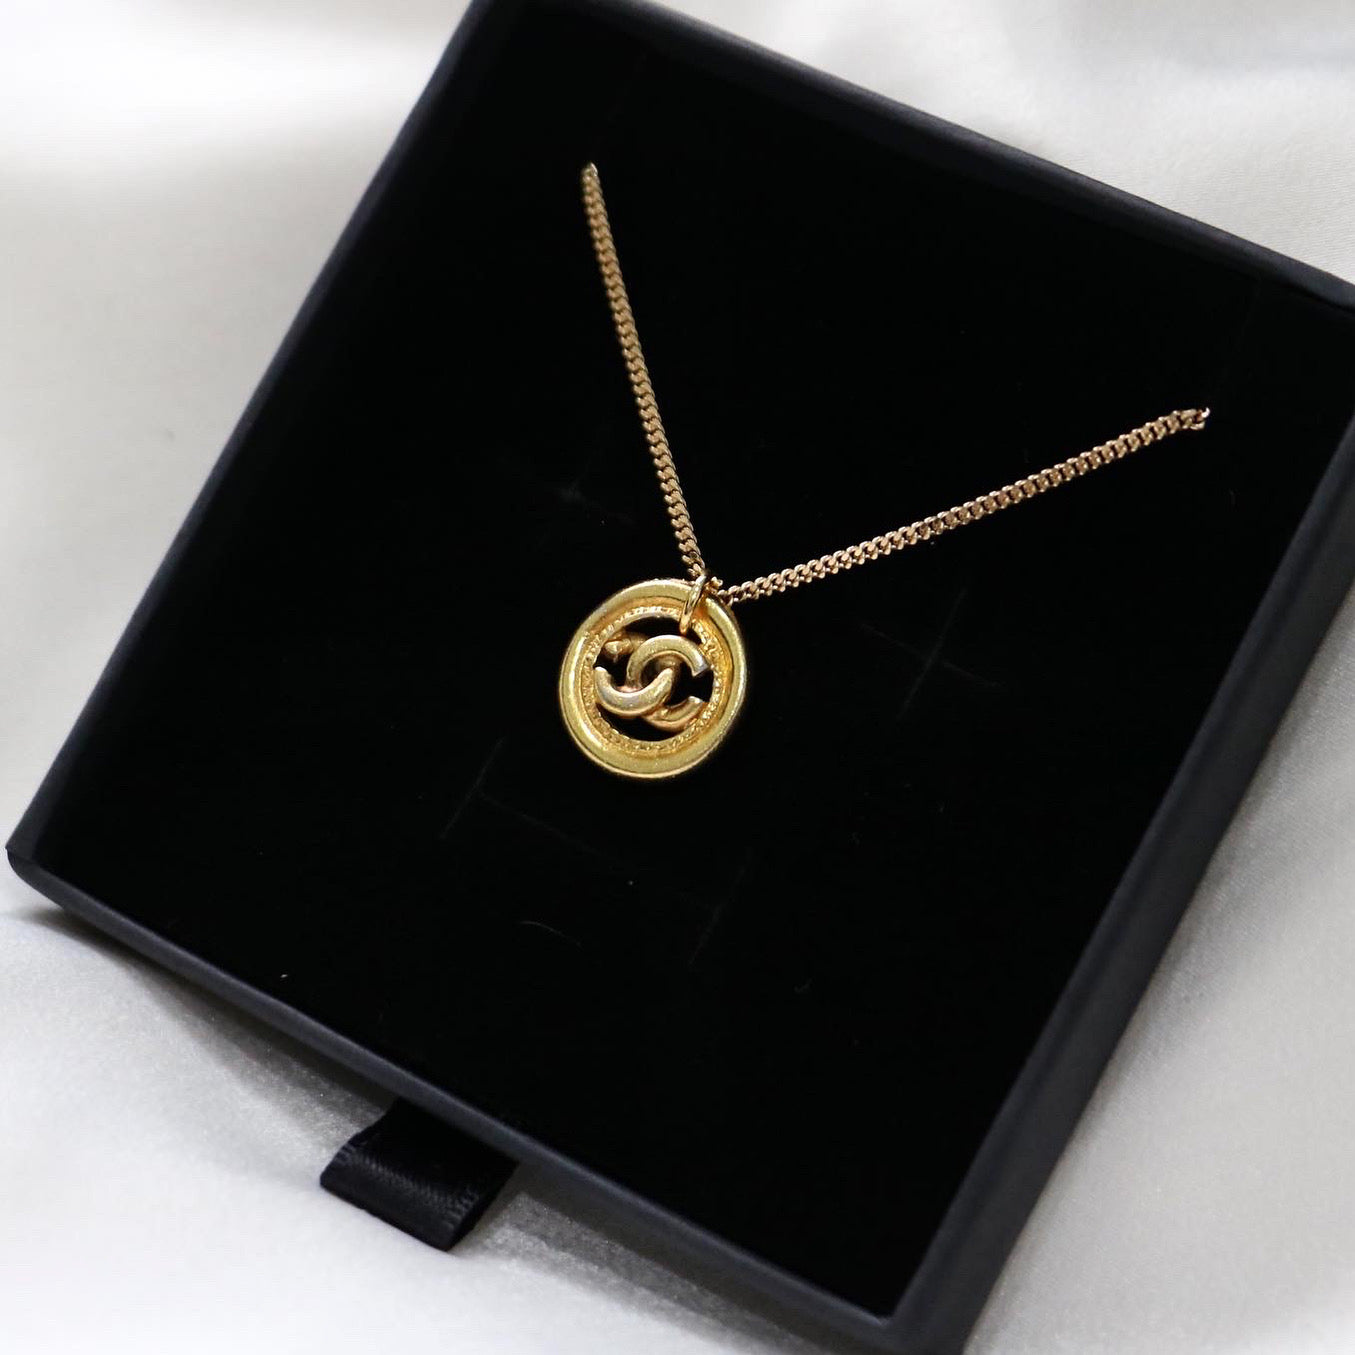 COLLIER UPCYCLÉ CHANEL